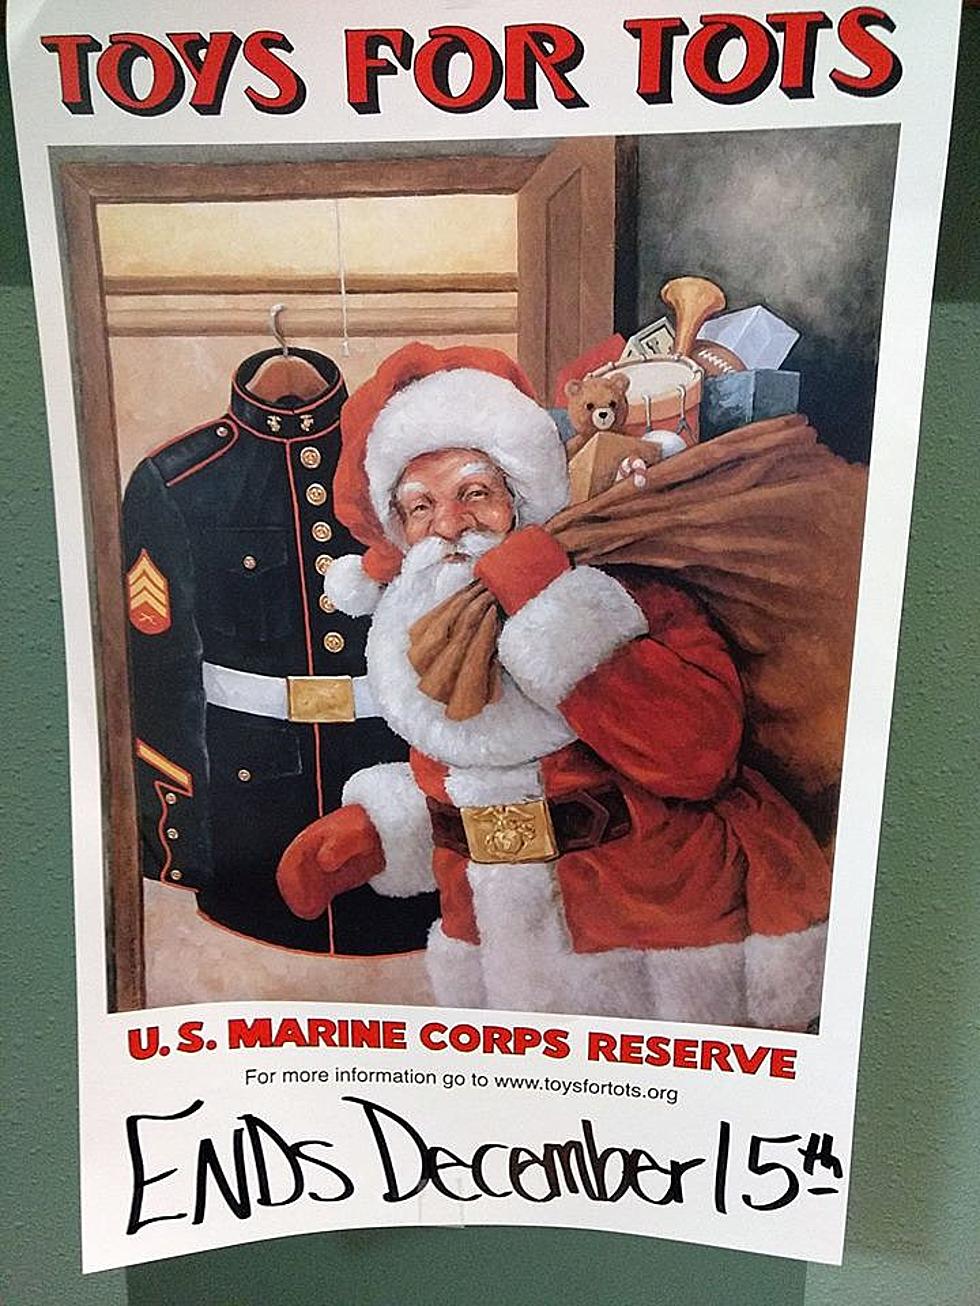 Make A Child Smile By Donating To Toys For Tots